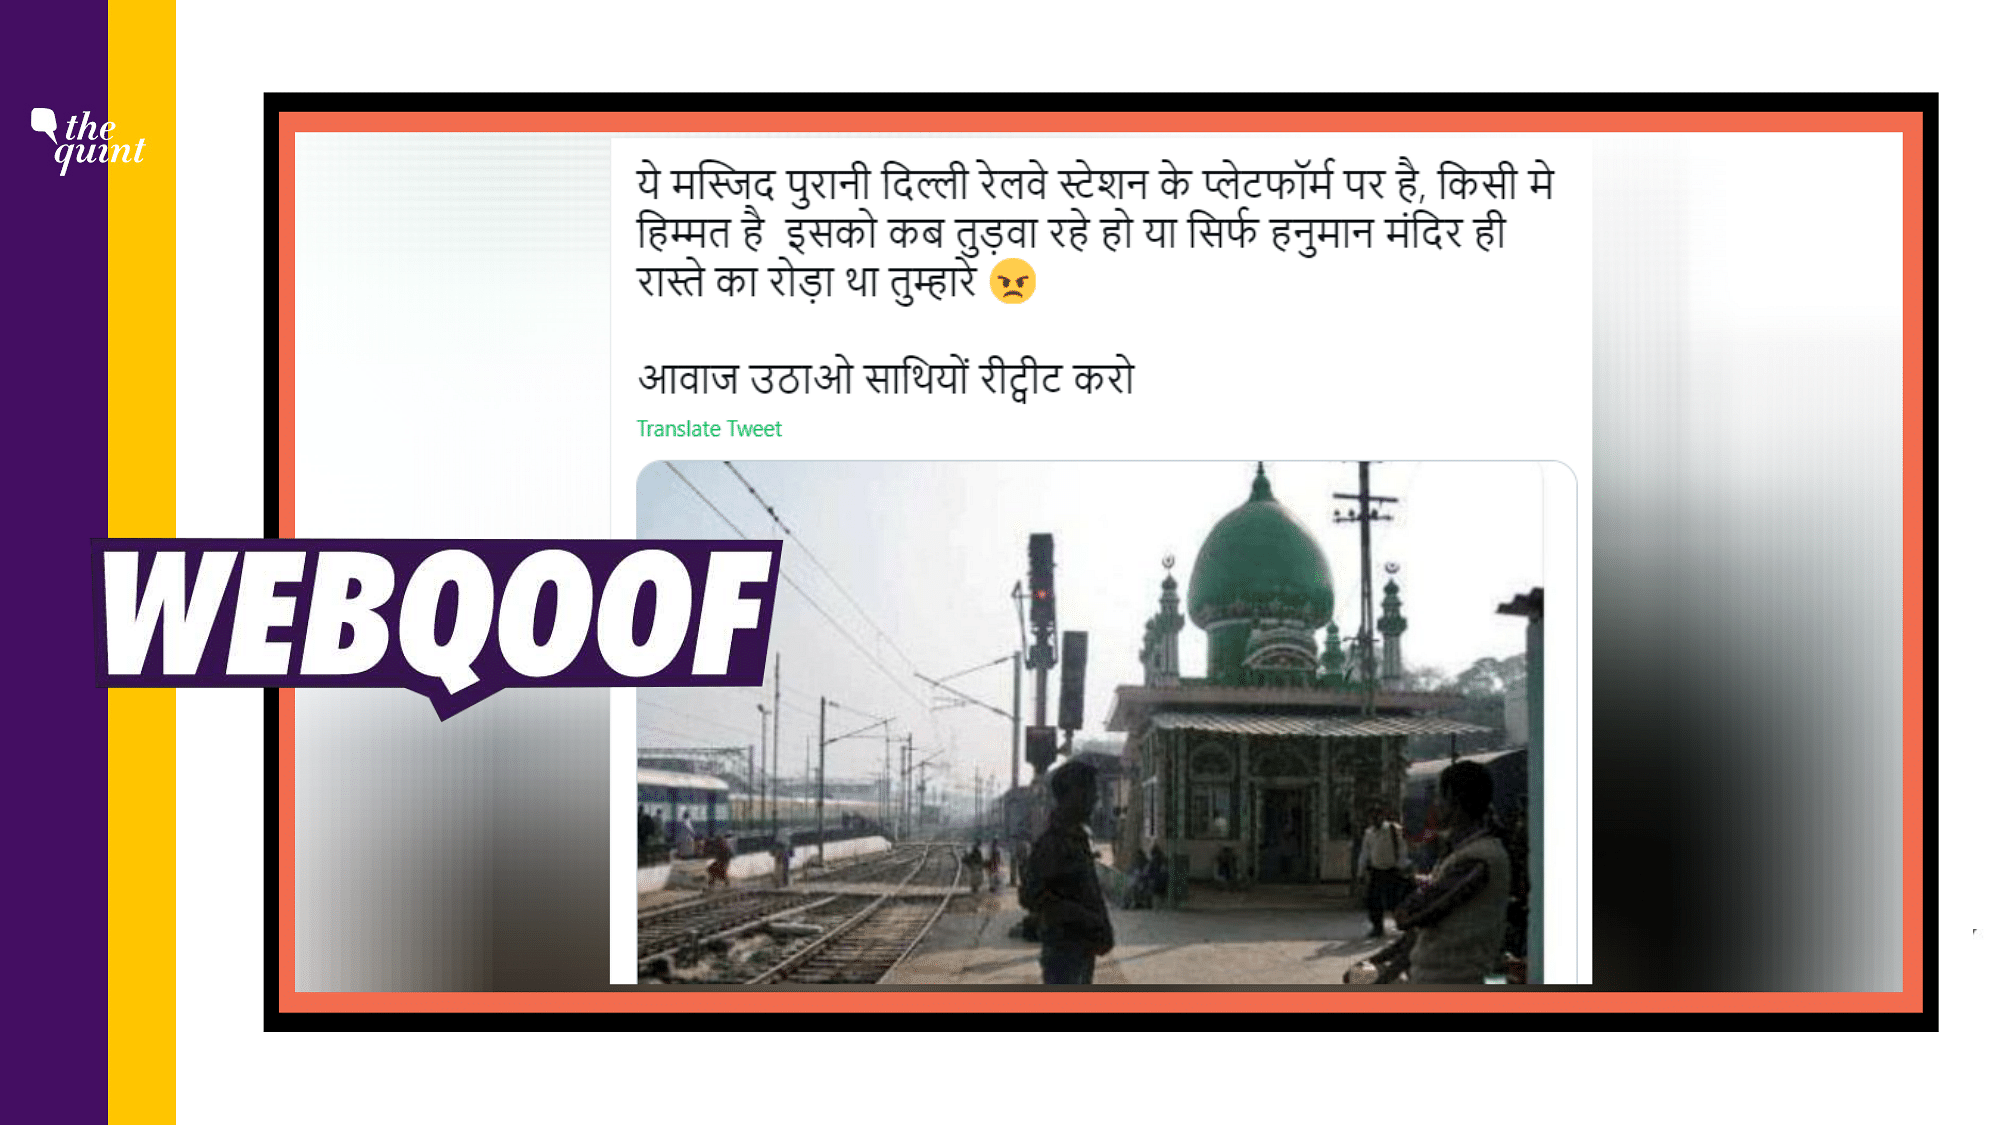  Fact-Check of Mosque on Old Delhi Railway Station. An archive of the post can be found <a href="https://archive.is/7dTpa">here</a>.